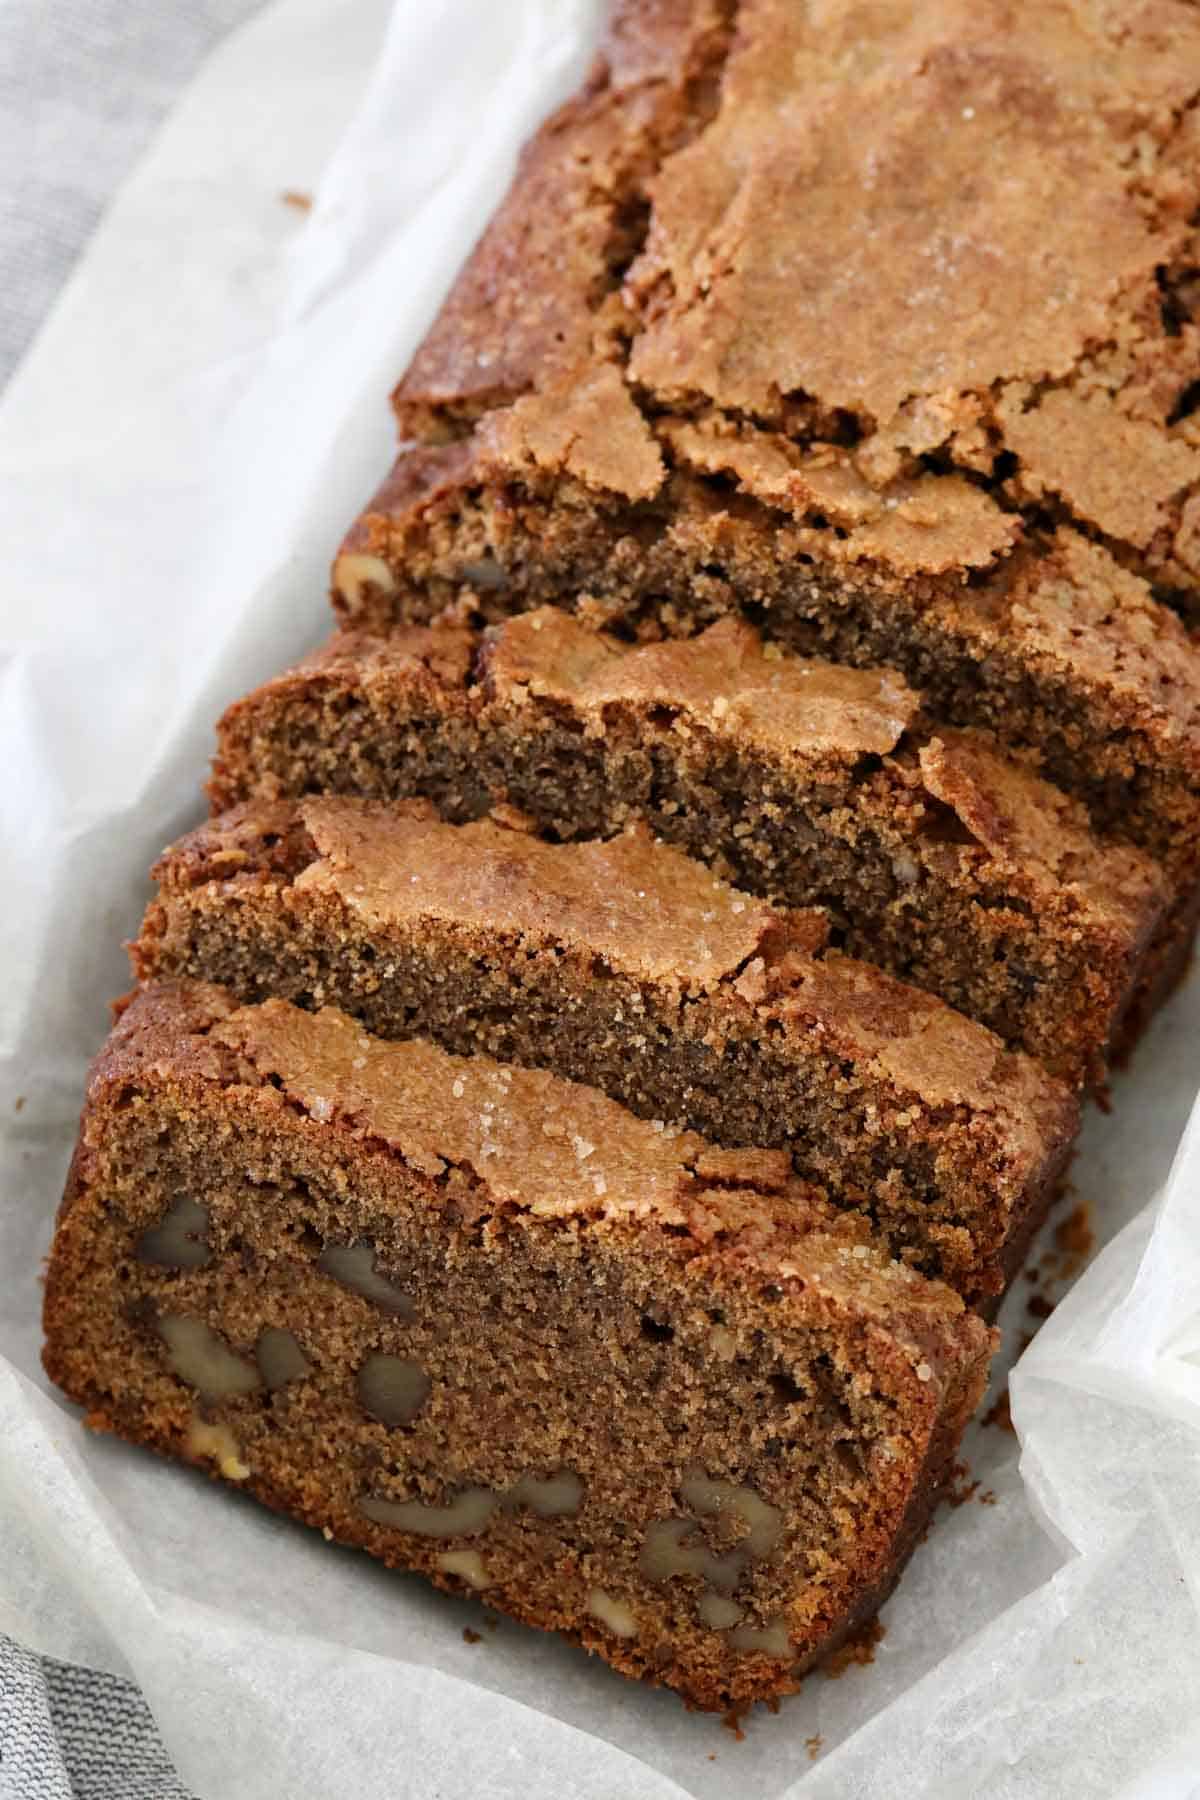 Walnut and coffee loaf cut into slices